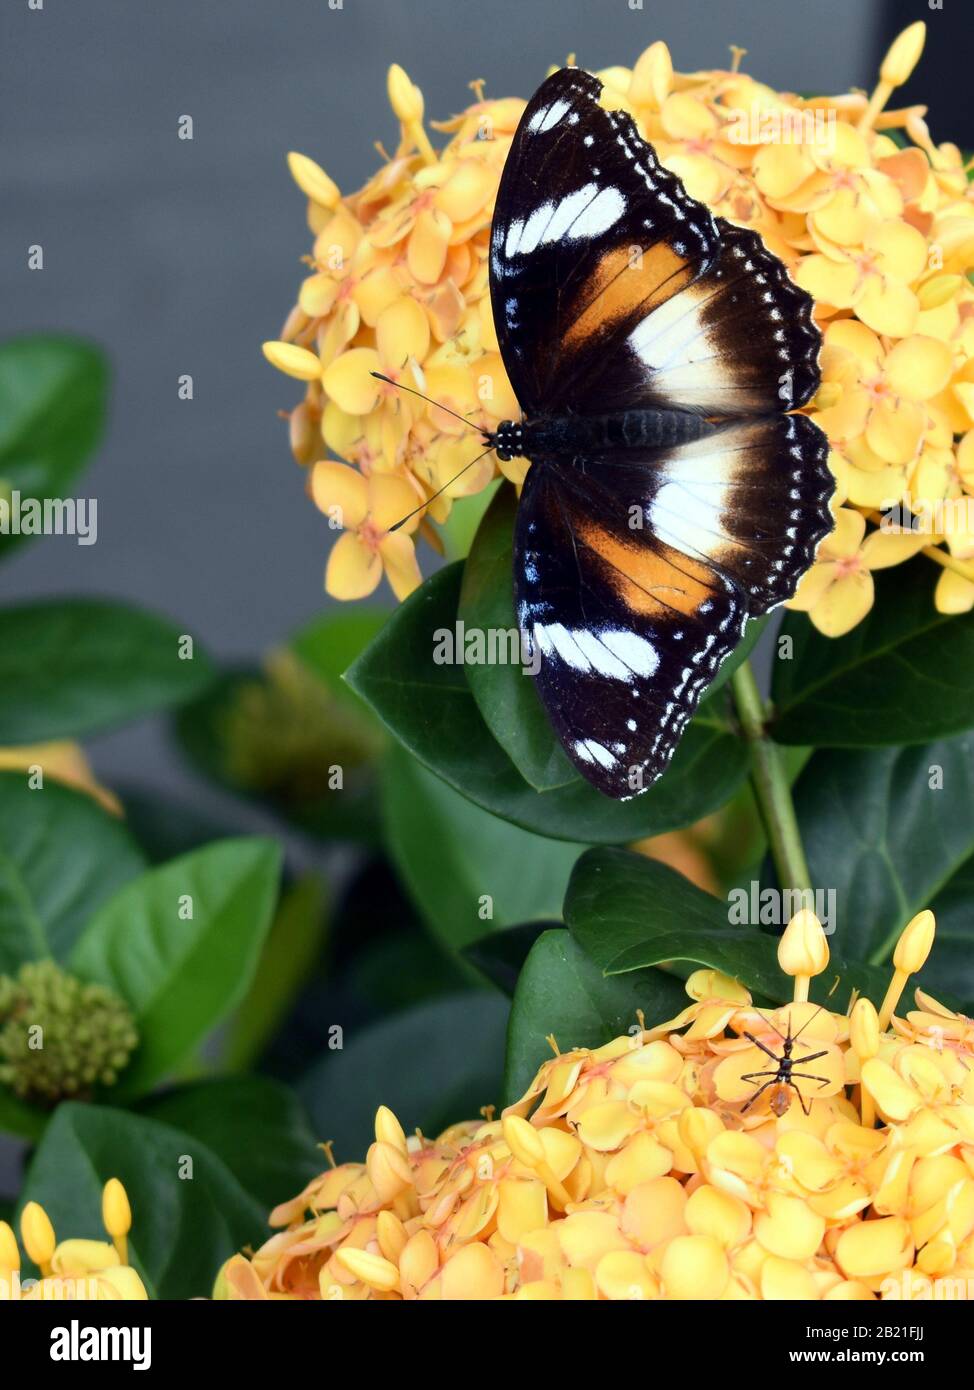 A close up of a beautiful butterfly and insect on adjacent yellow flowers Stock Photo